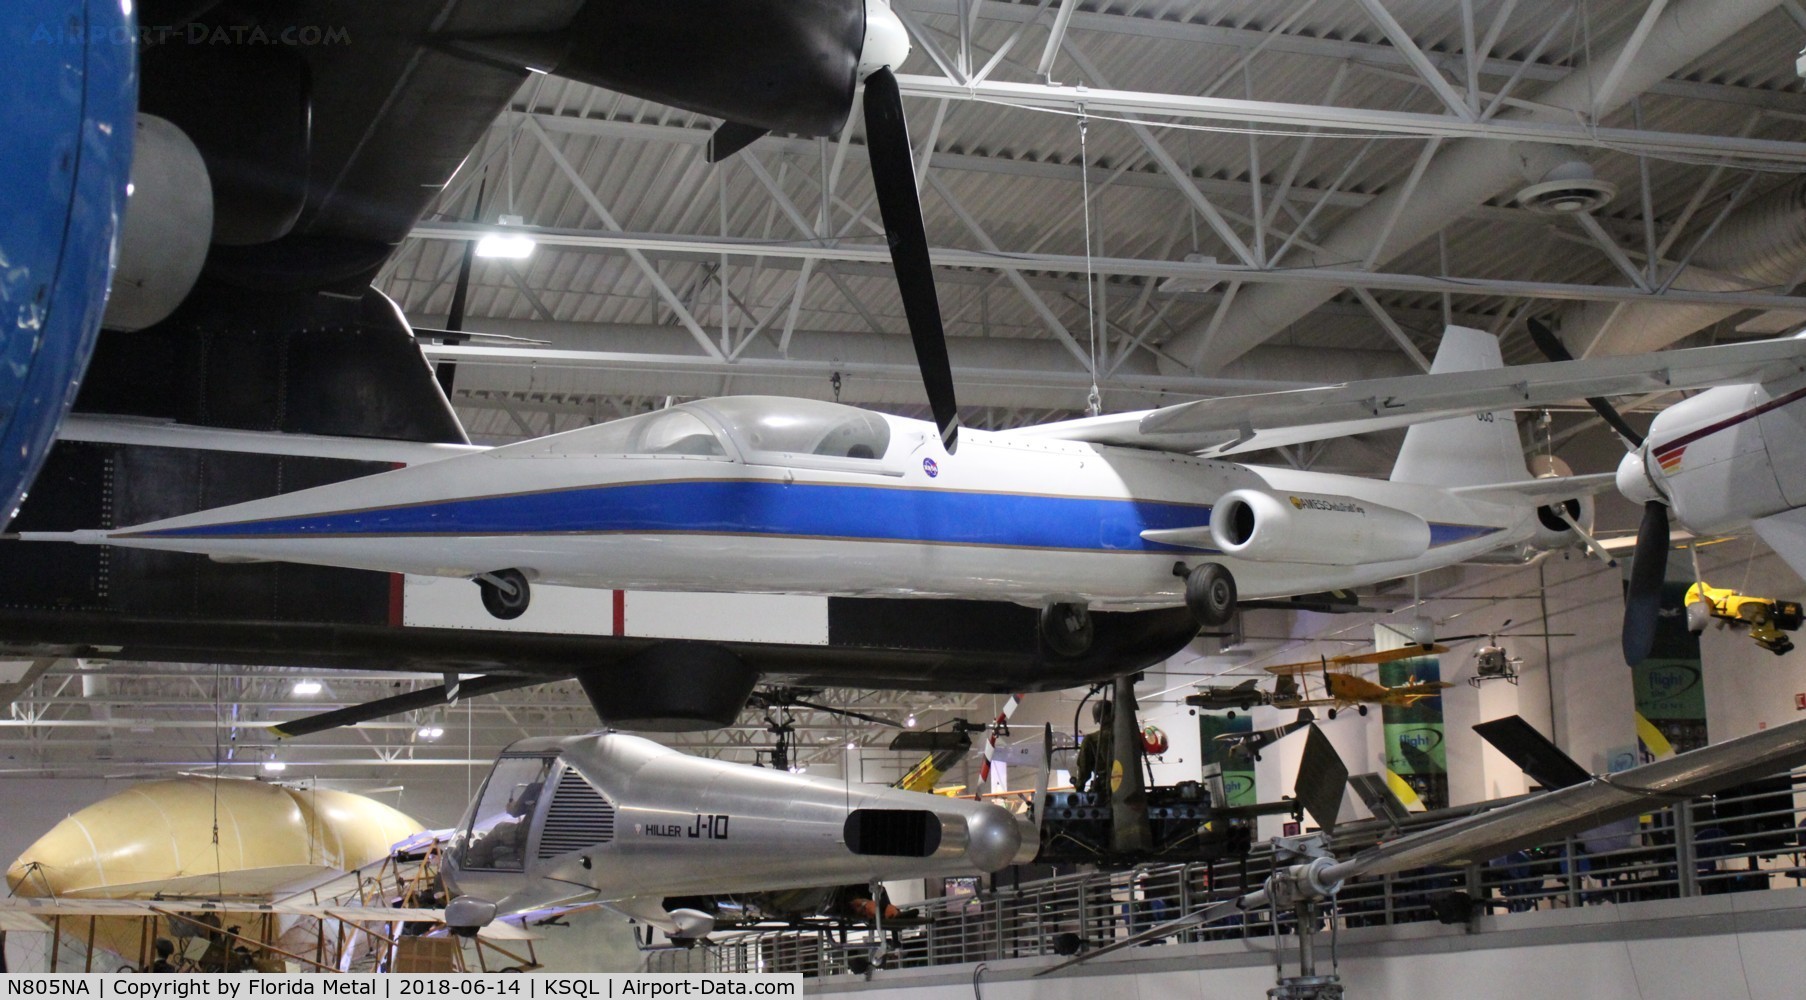 N805NA, Ames Industrial Corp Ny AD-1 C/N 001, Hiller Museum